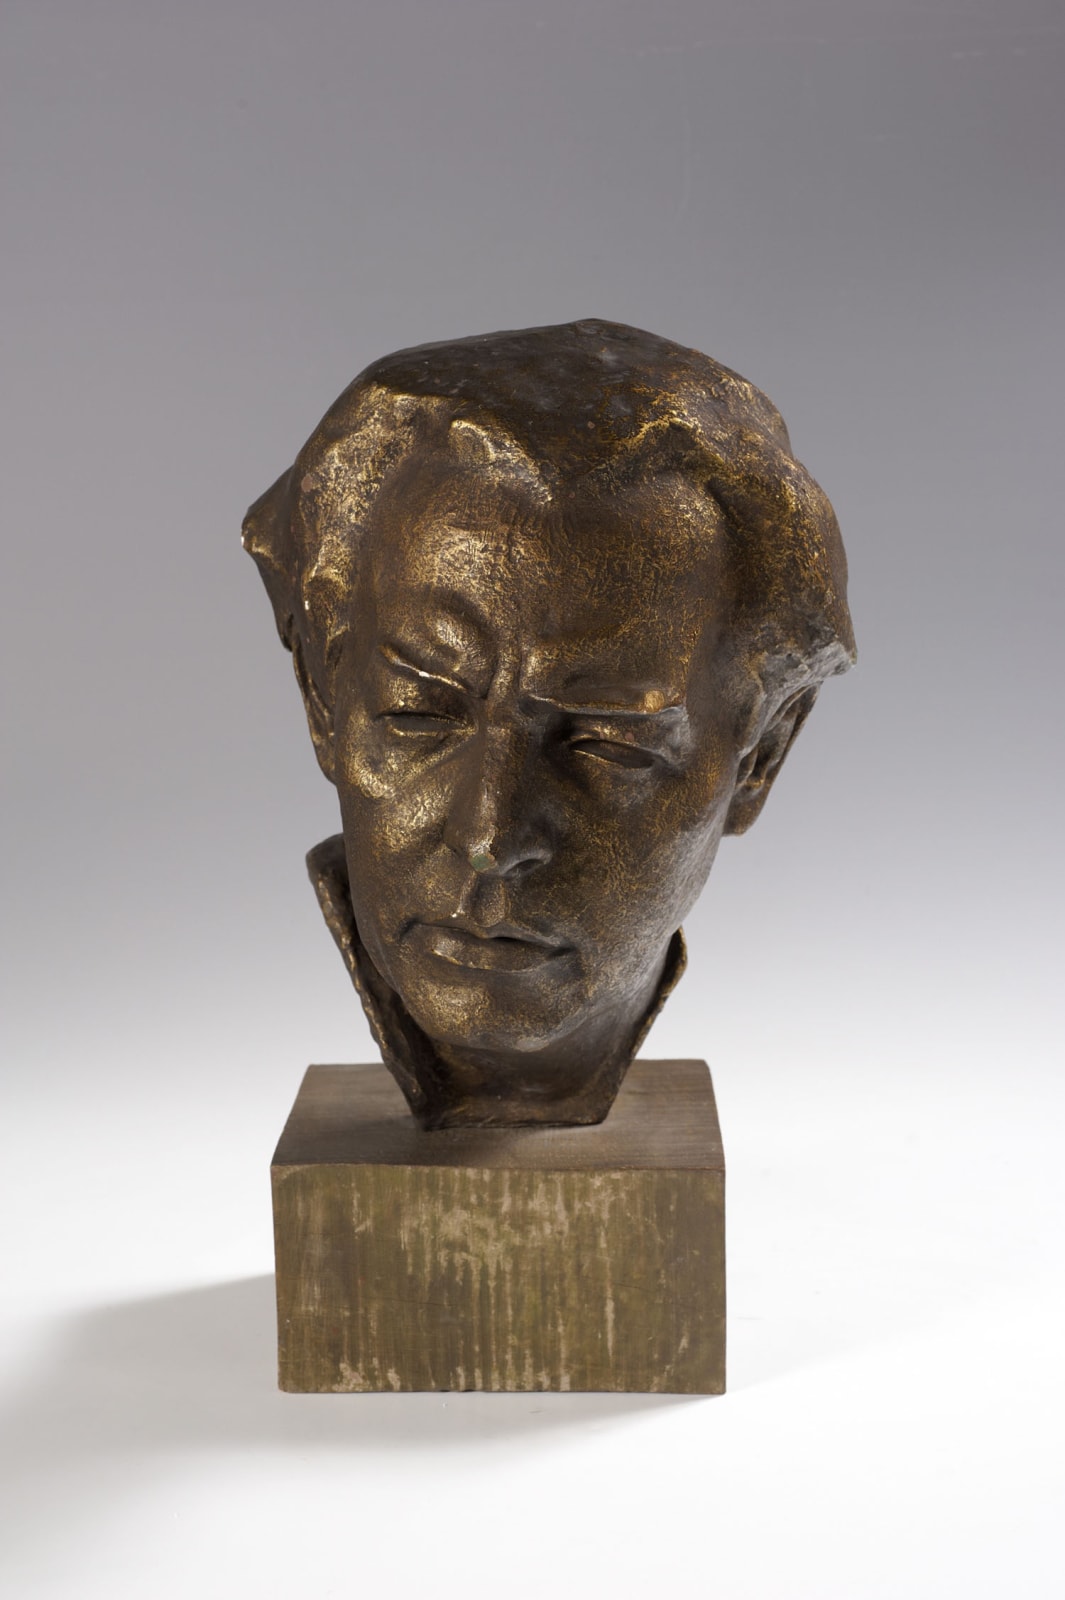 Max Sokol (1895-1973) Head of Joseph Leftwich n.d. Plaster 43 x 23.5 x 24 cm Ben Uri Collection © Max Sokol estate To see and discover more about this artist click here